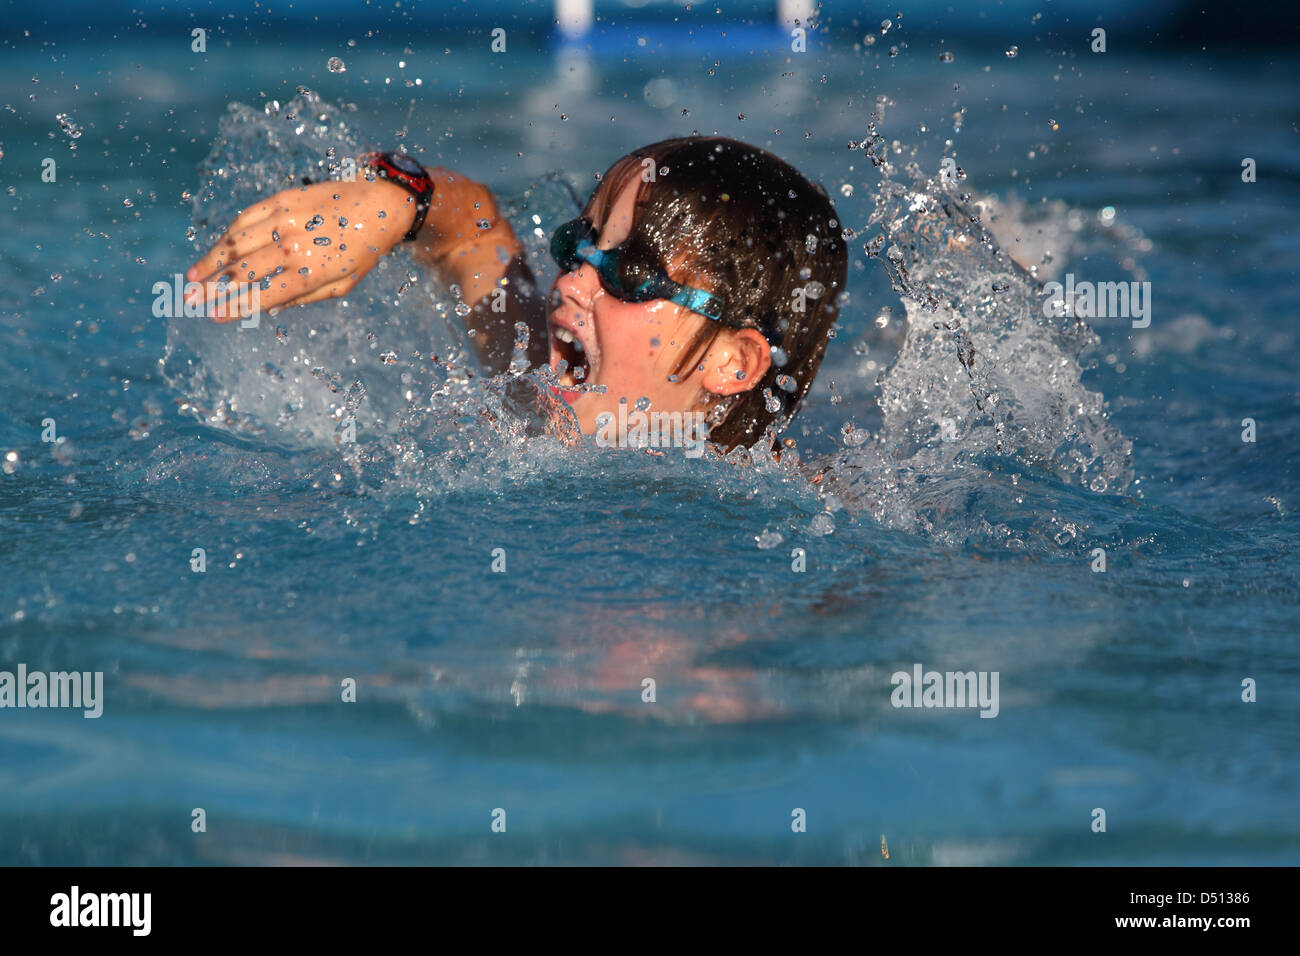 Berlin, Germany, at the boy in front crawl swimming Stock Photo